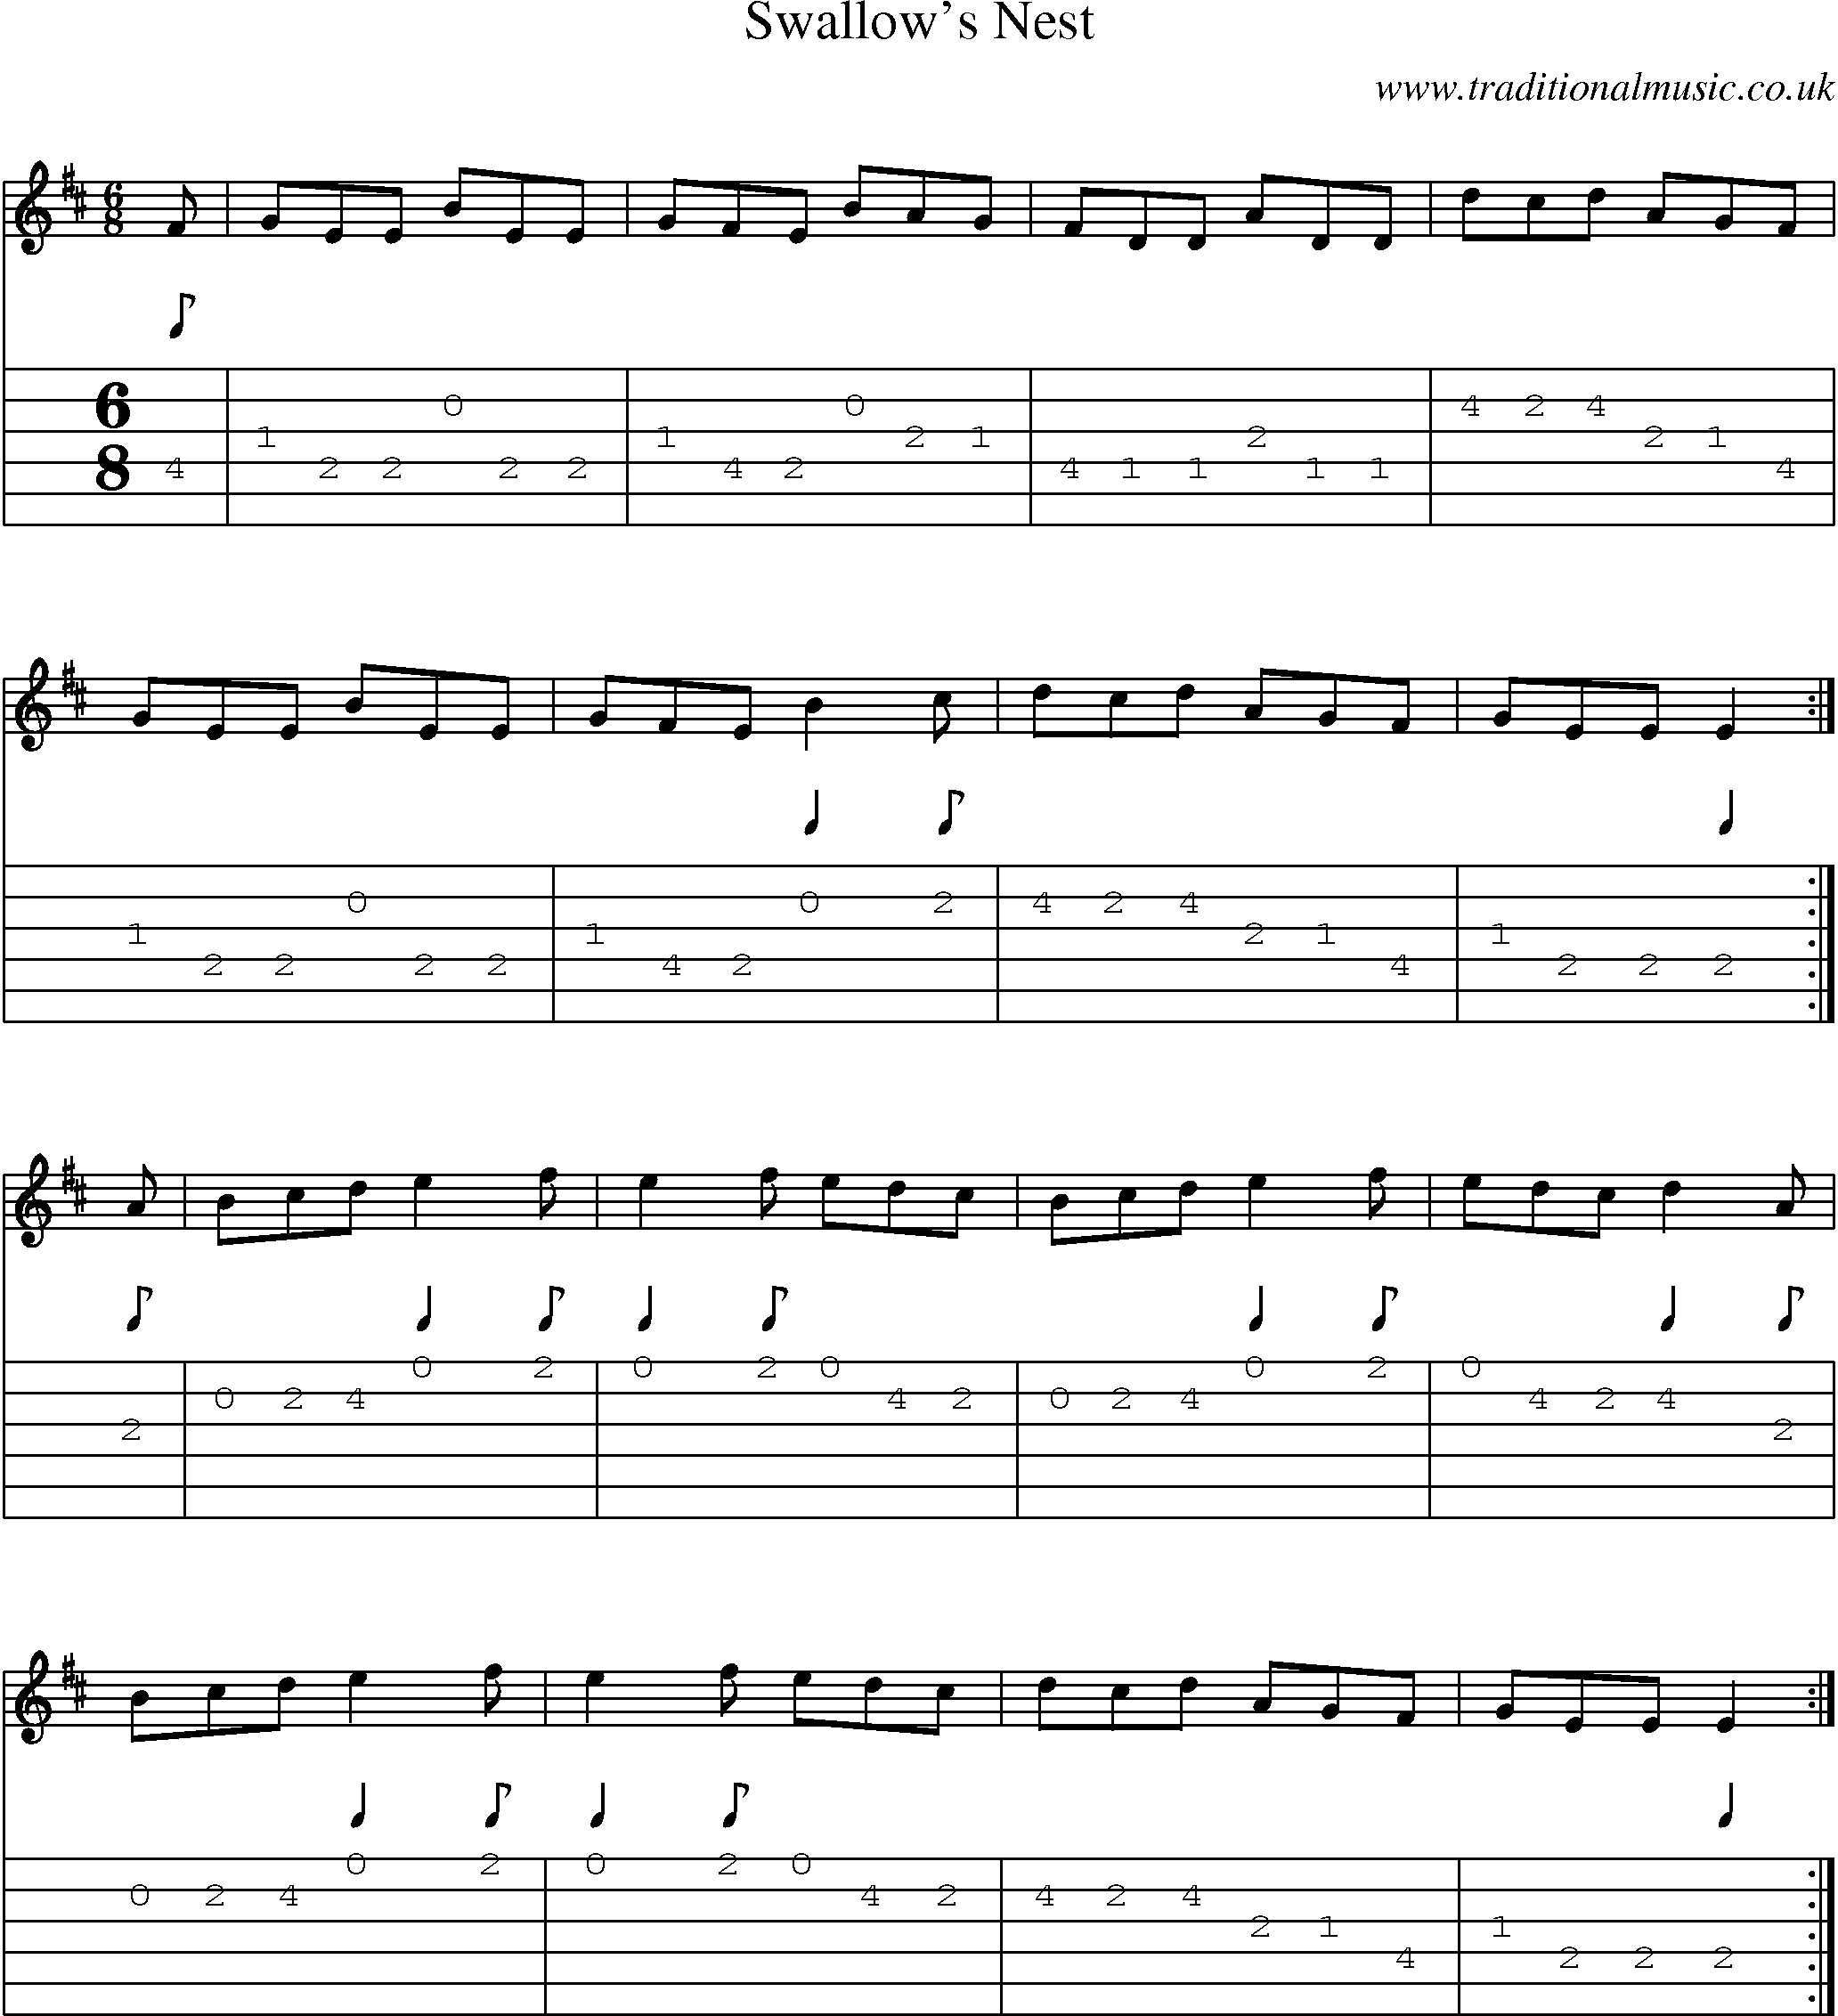 Music Score and Guitar Tabs for Swallows Nest